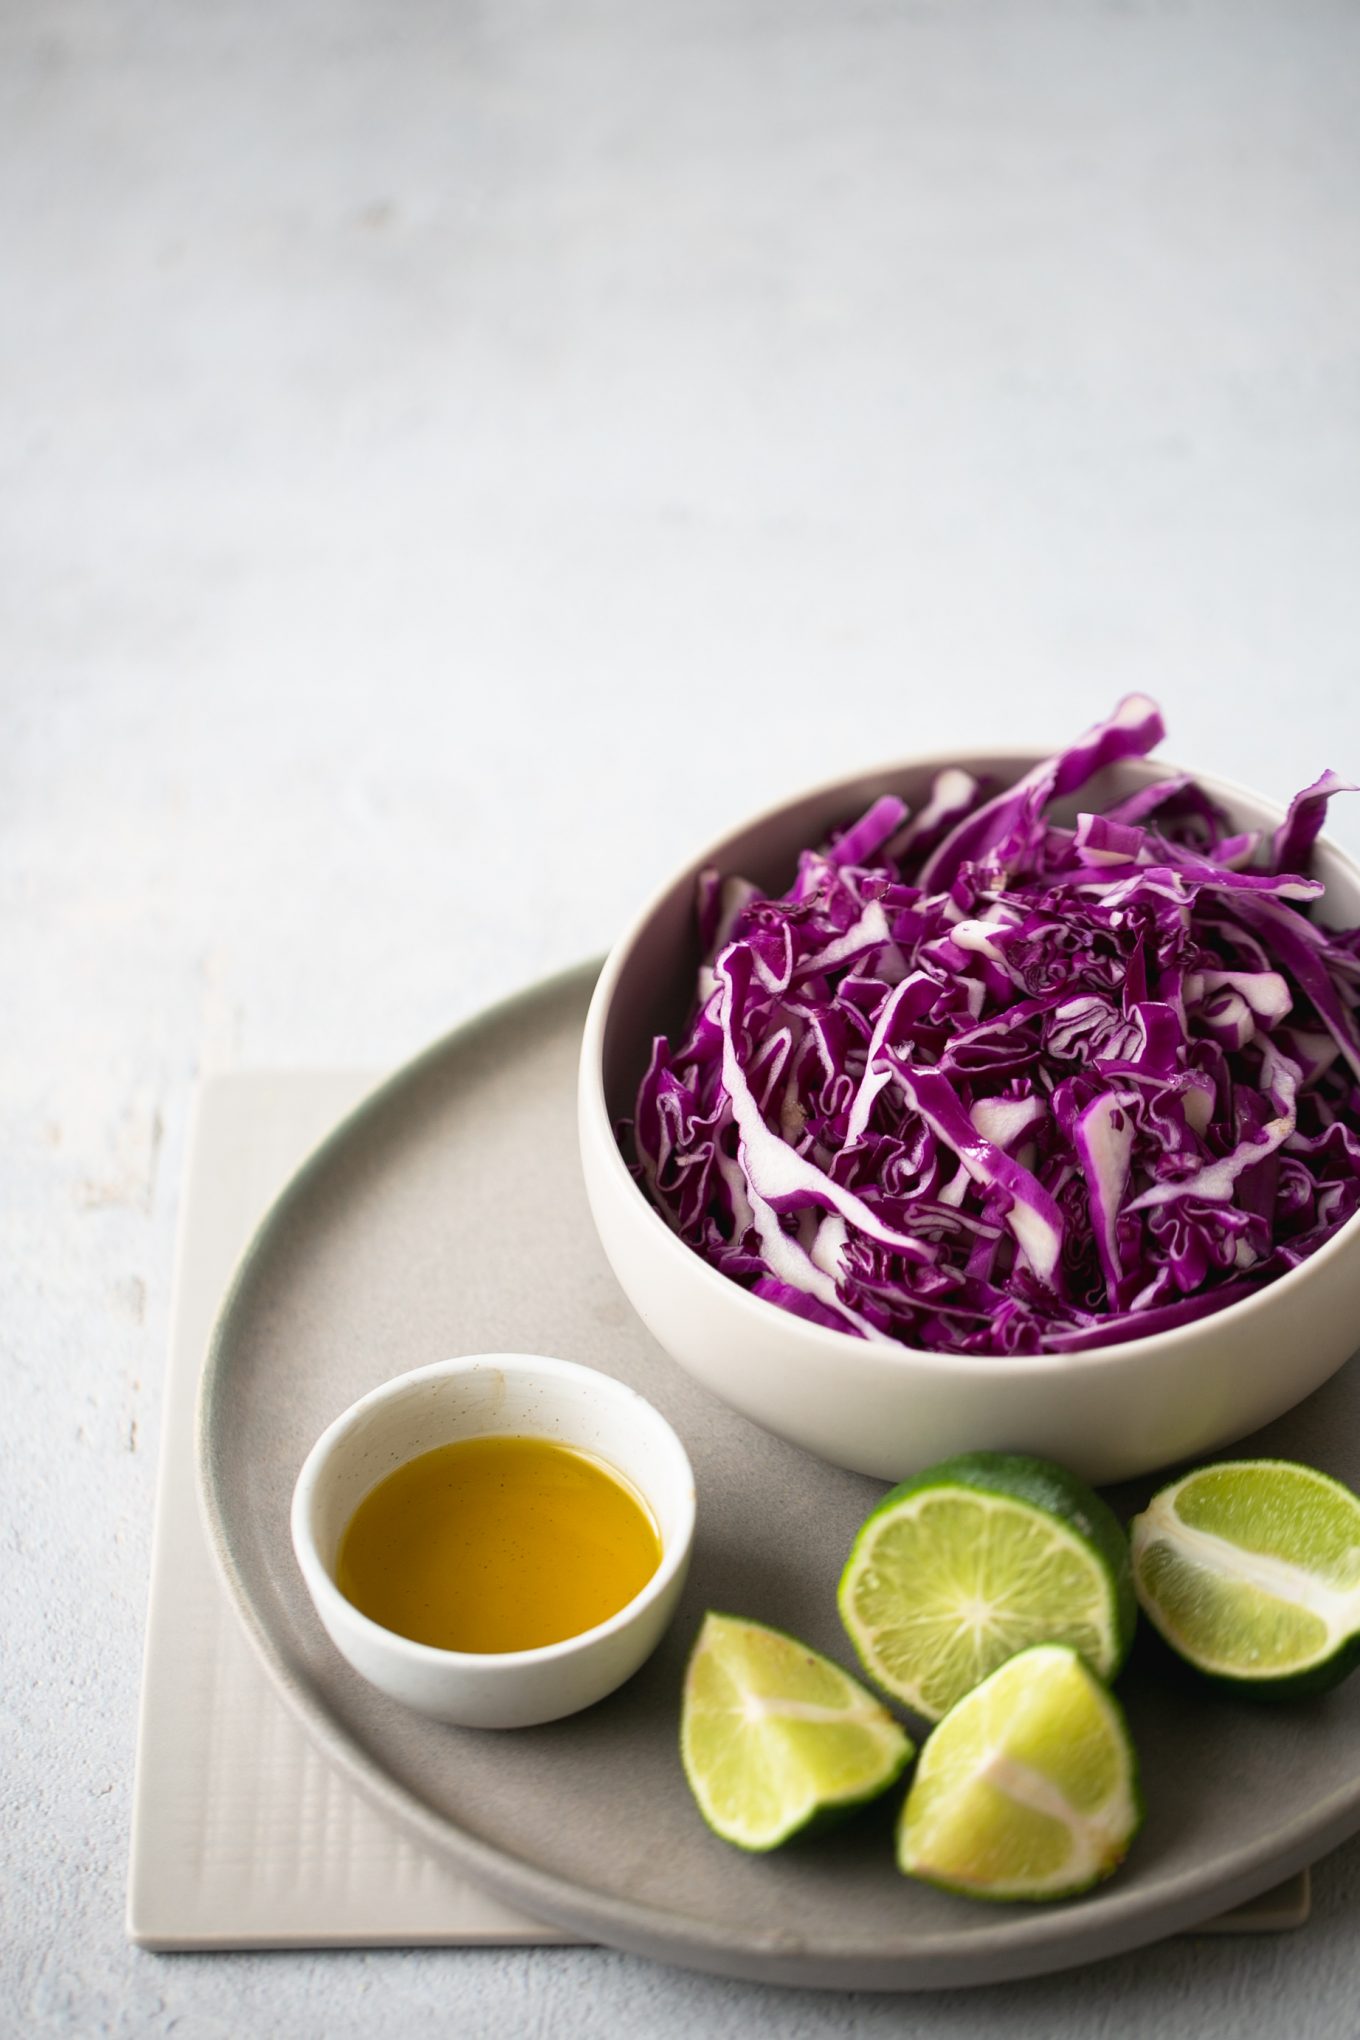 red cabbage, limes and olive oil 